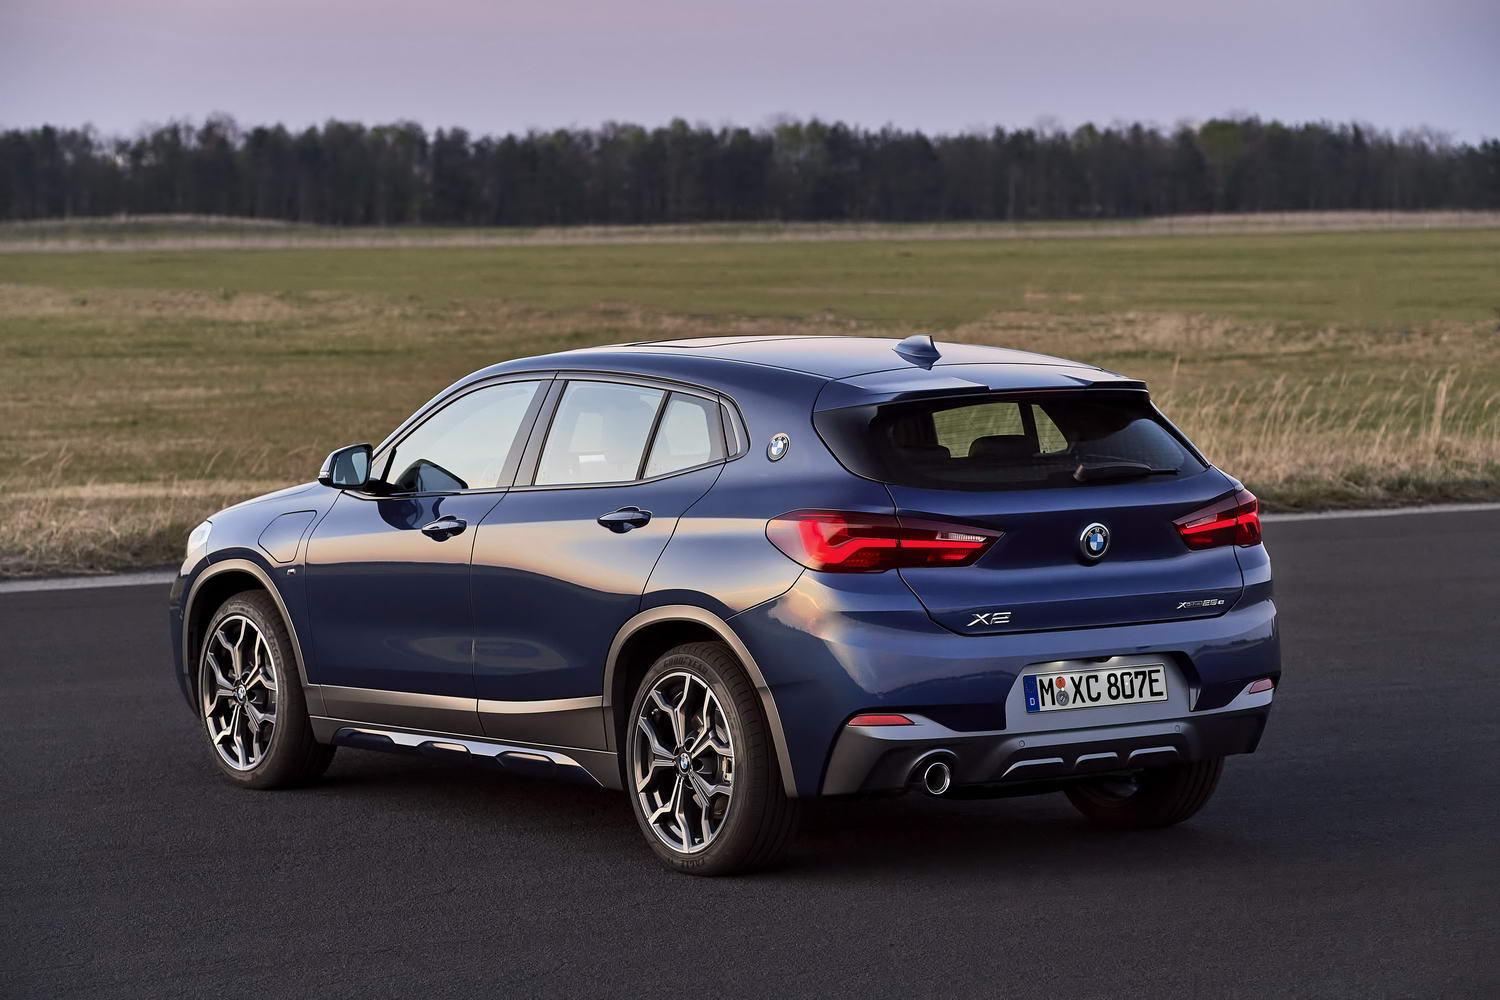 Hybrid leads revised BMW X2 range - car and motoring news by CompleteCar.ie